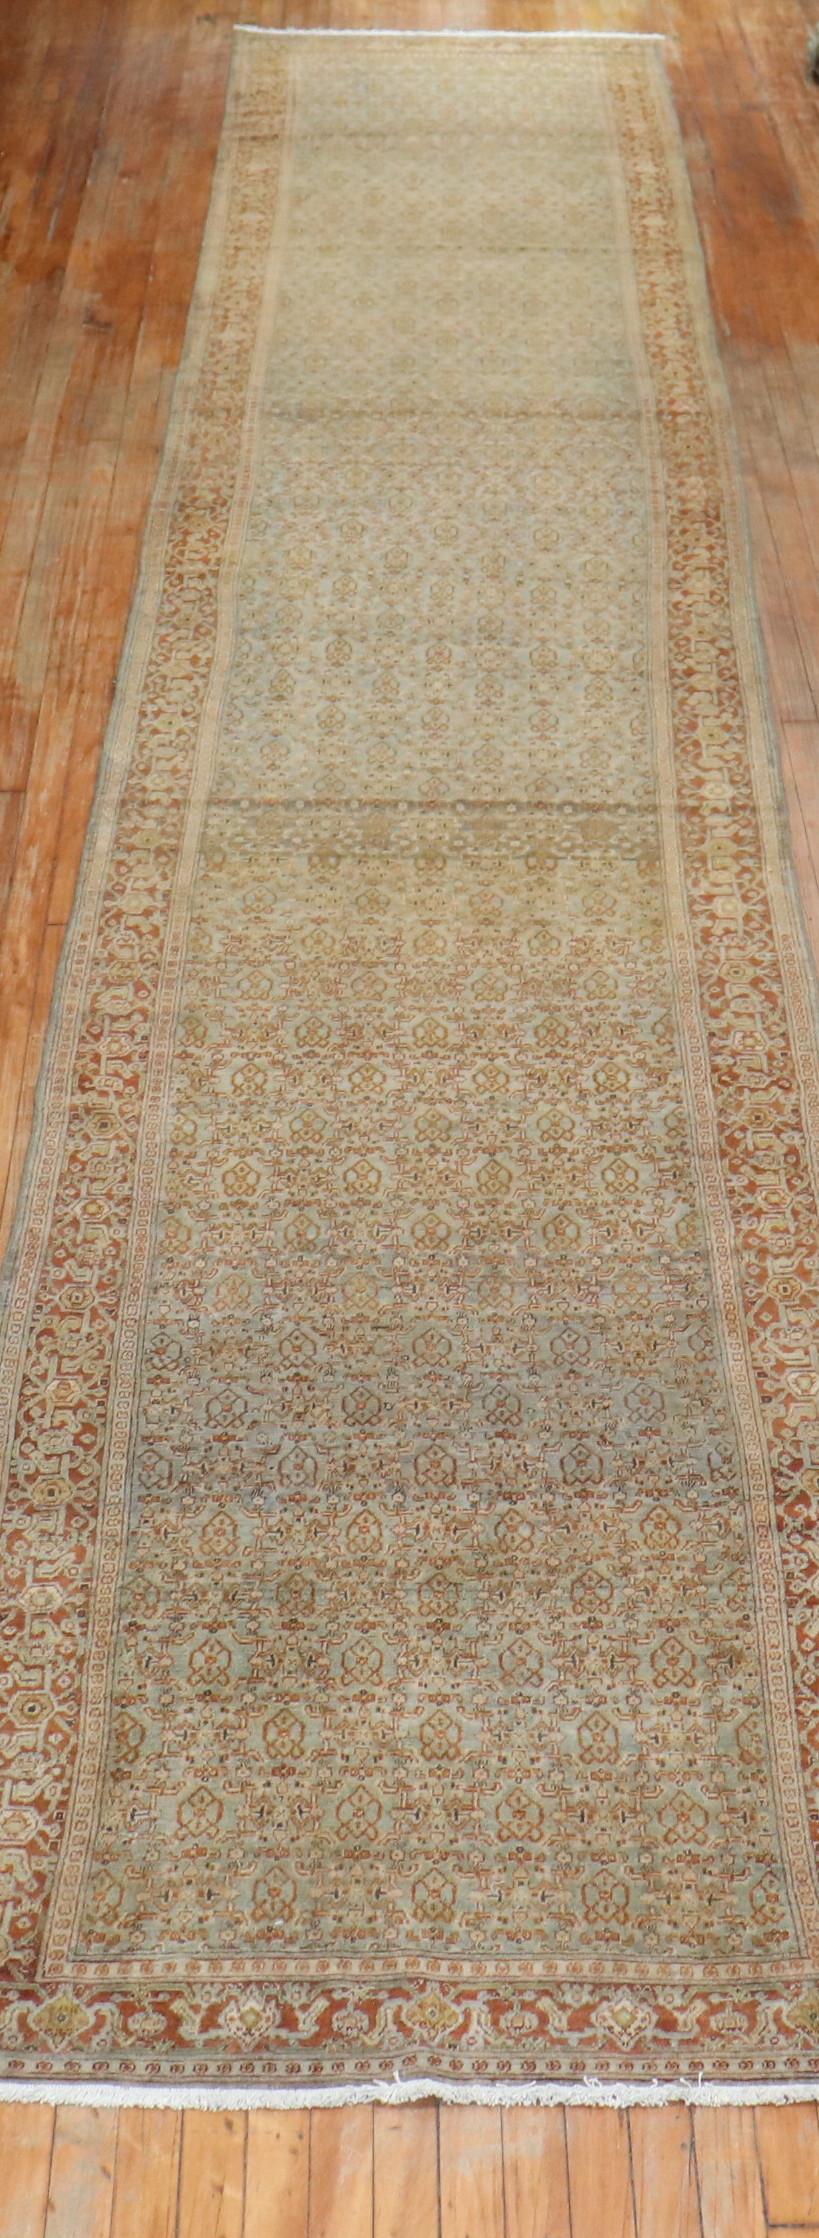 Fine quality brownish blueish/green/gray field, terracotta border Persian Senneh Runner. It has that repetitive Classic Herati design you see in most senneh rugs. The colors are dreamy, circa 1910.

Size: 3'6